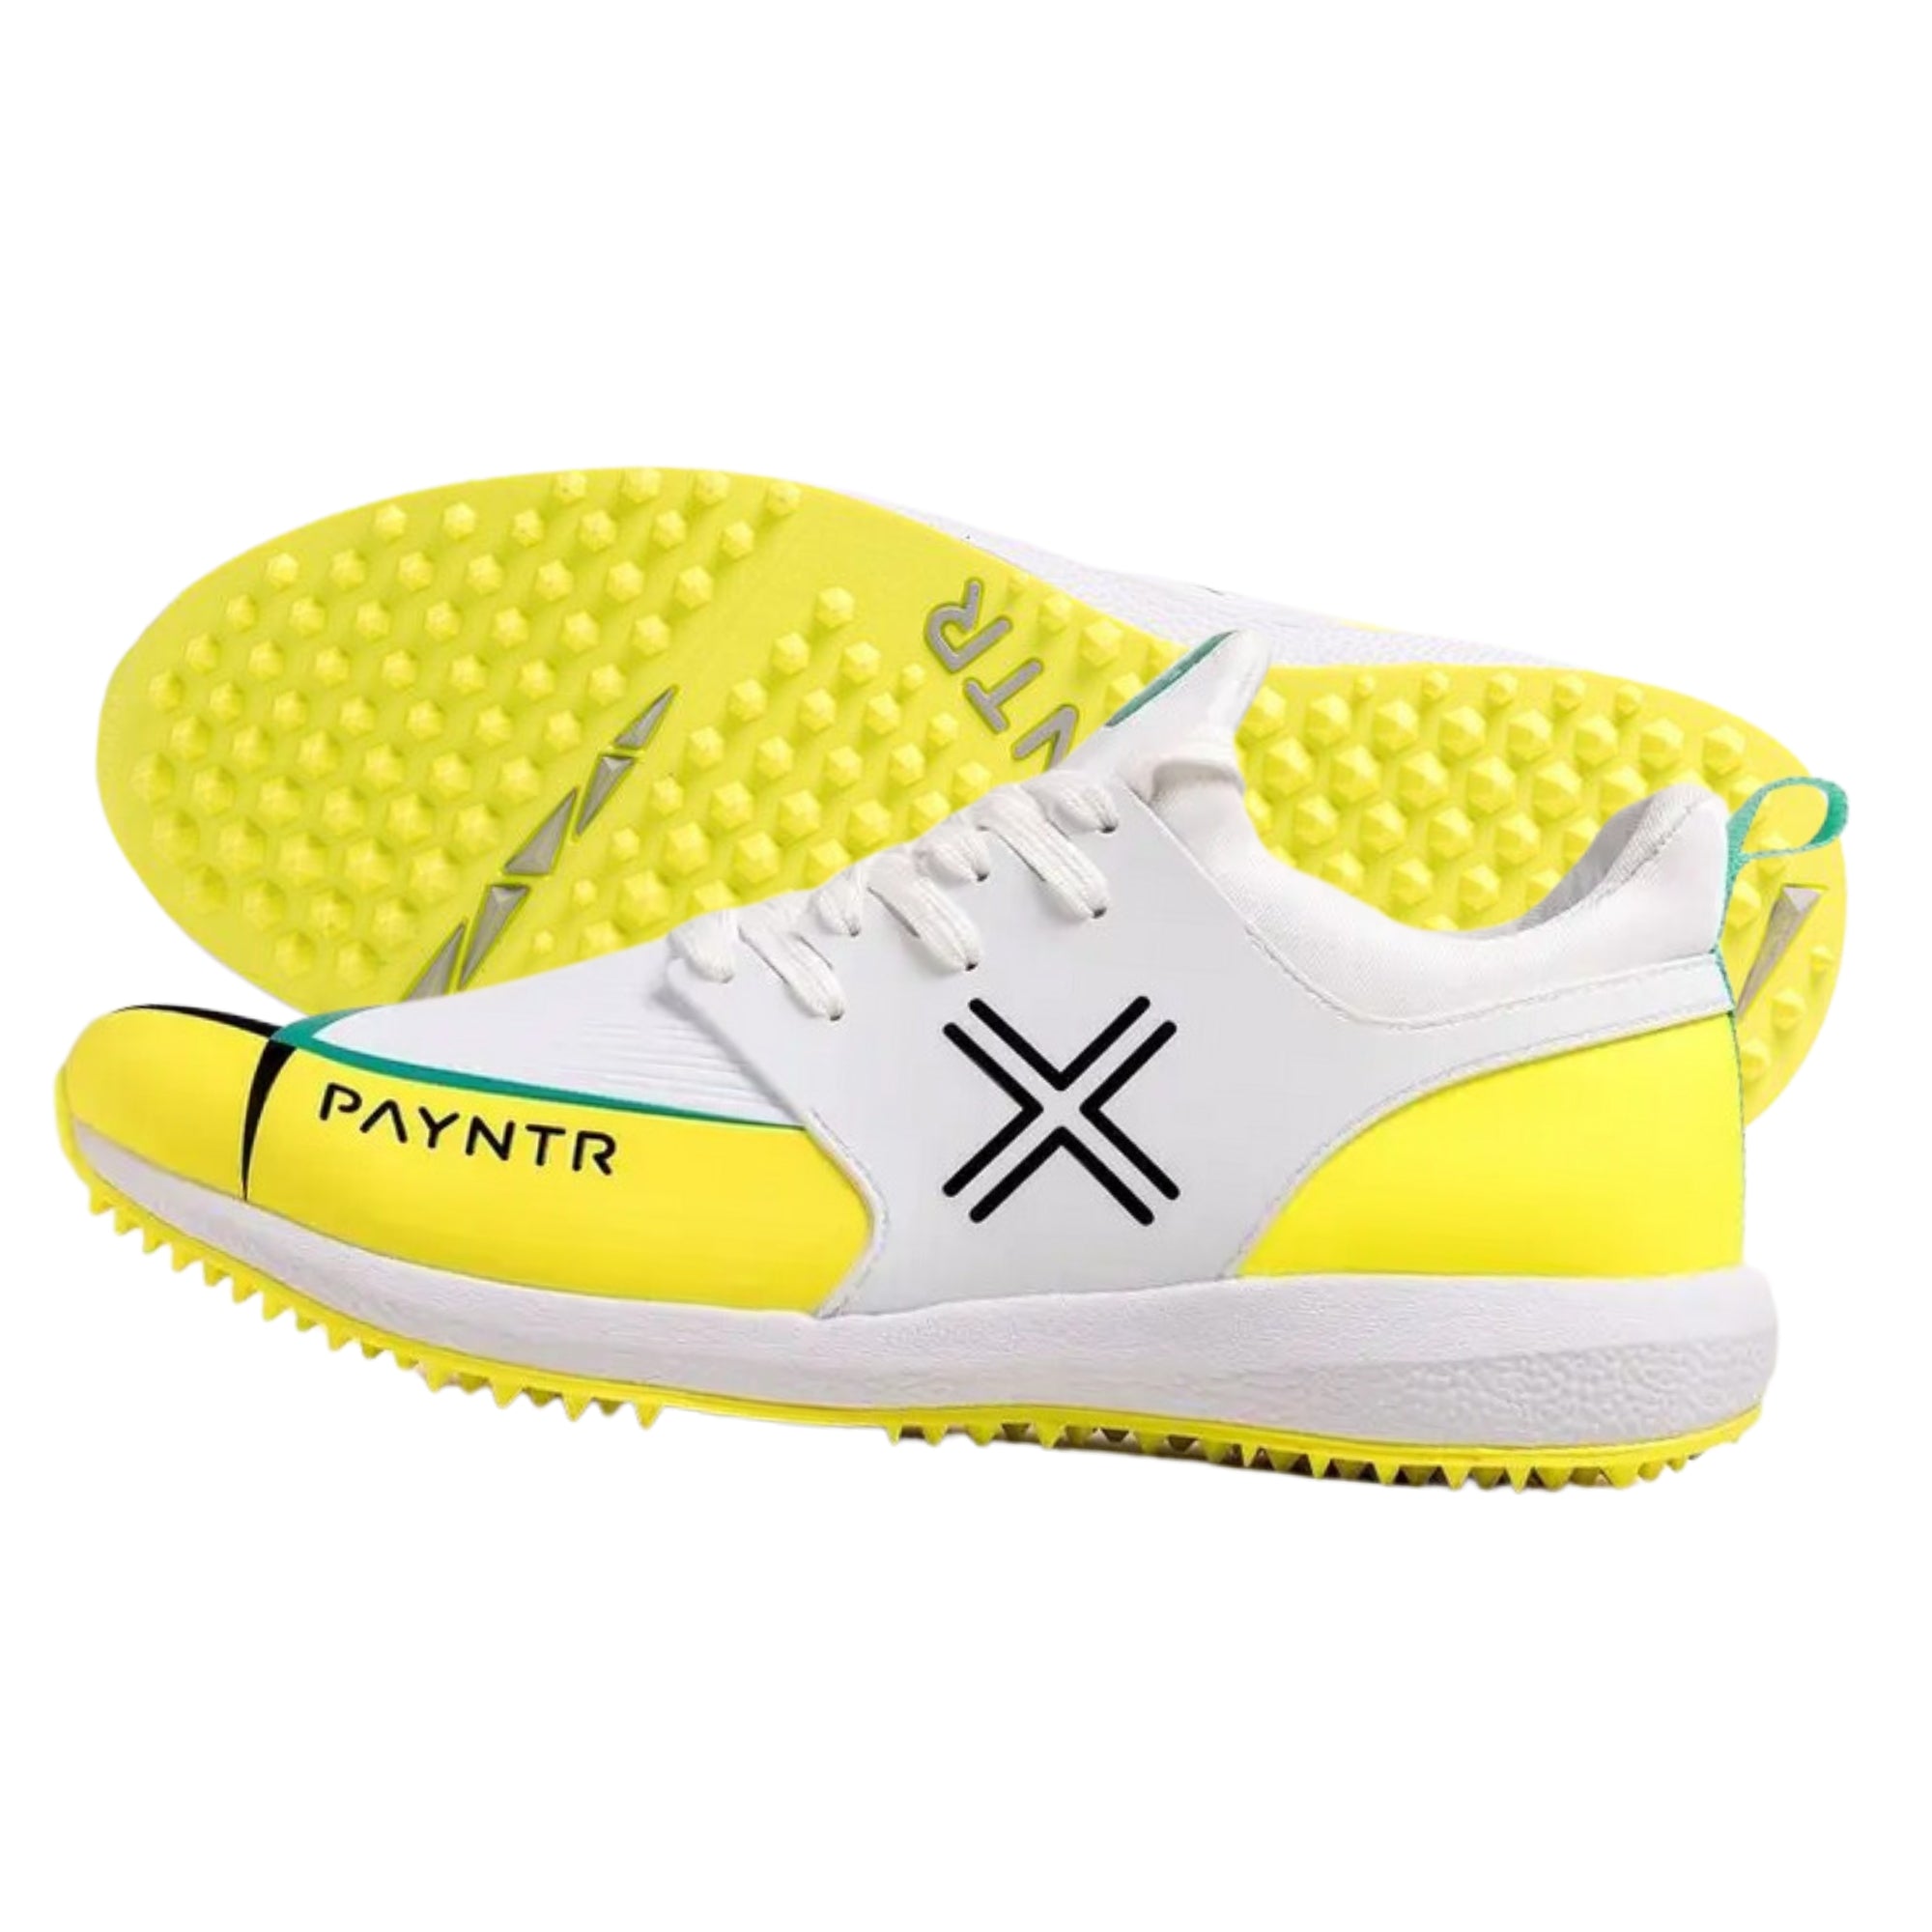 Payntr cricket shoes, Model X MK3 Evo Pimple - White/Yellow All Rounder Cricket Shoes